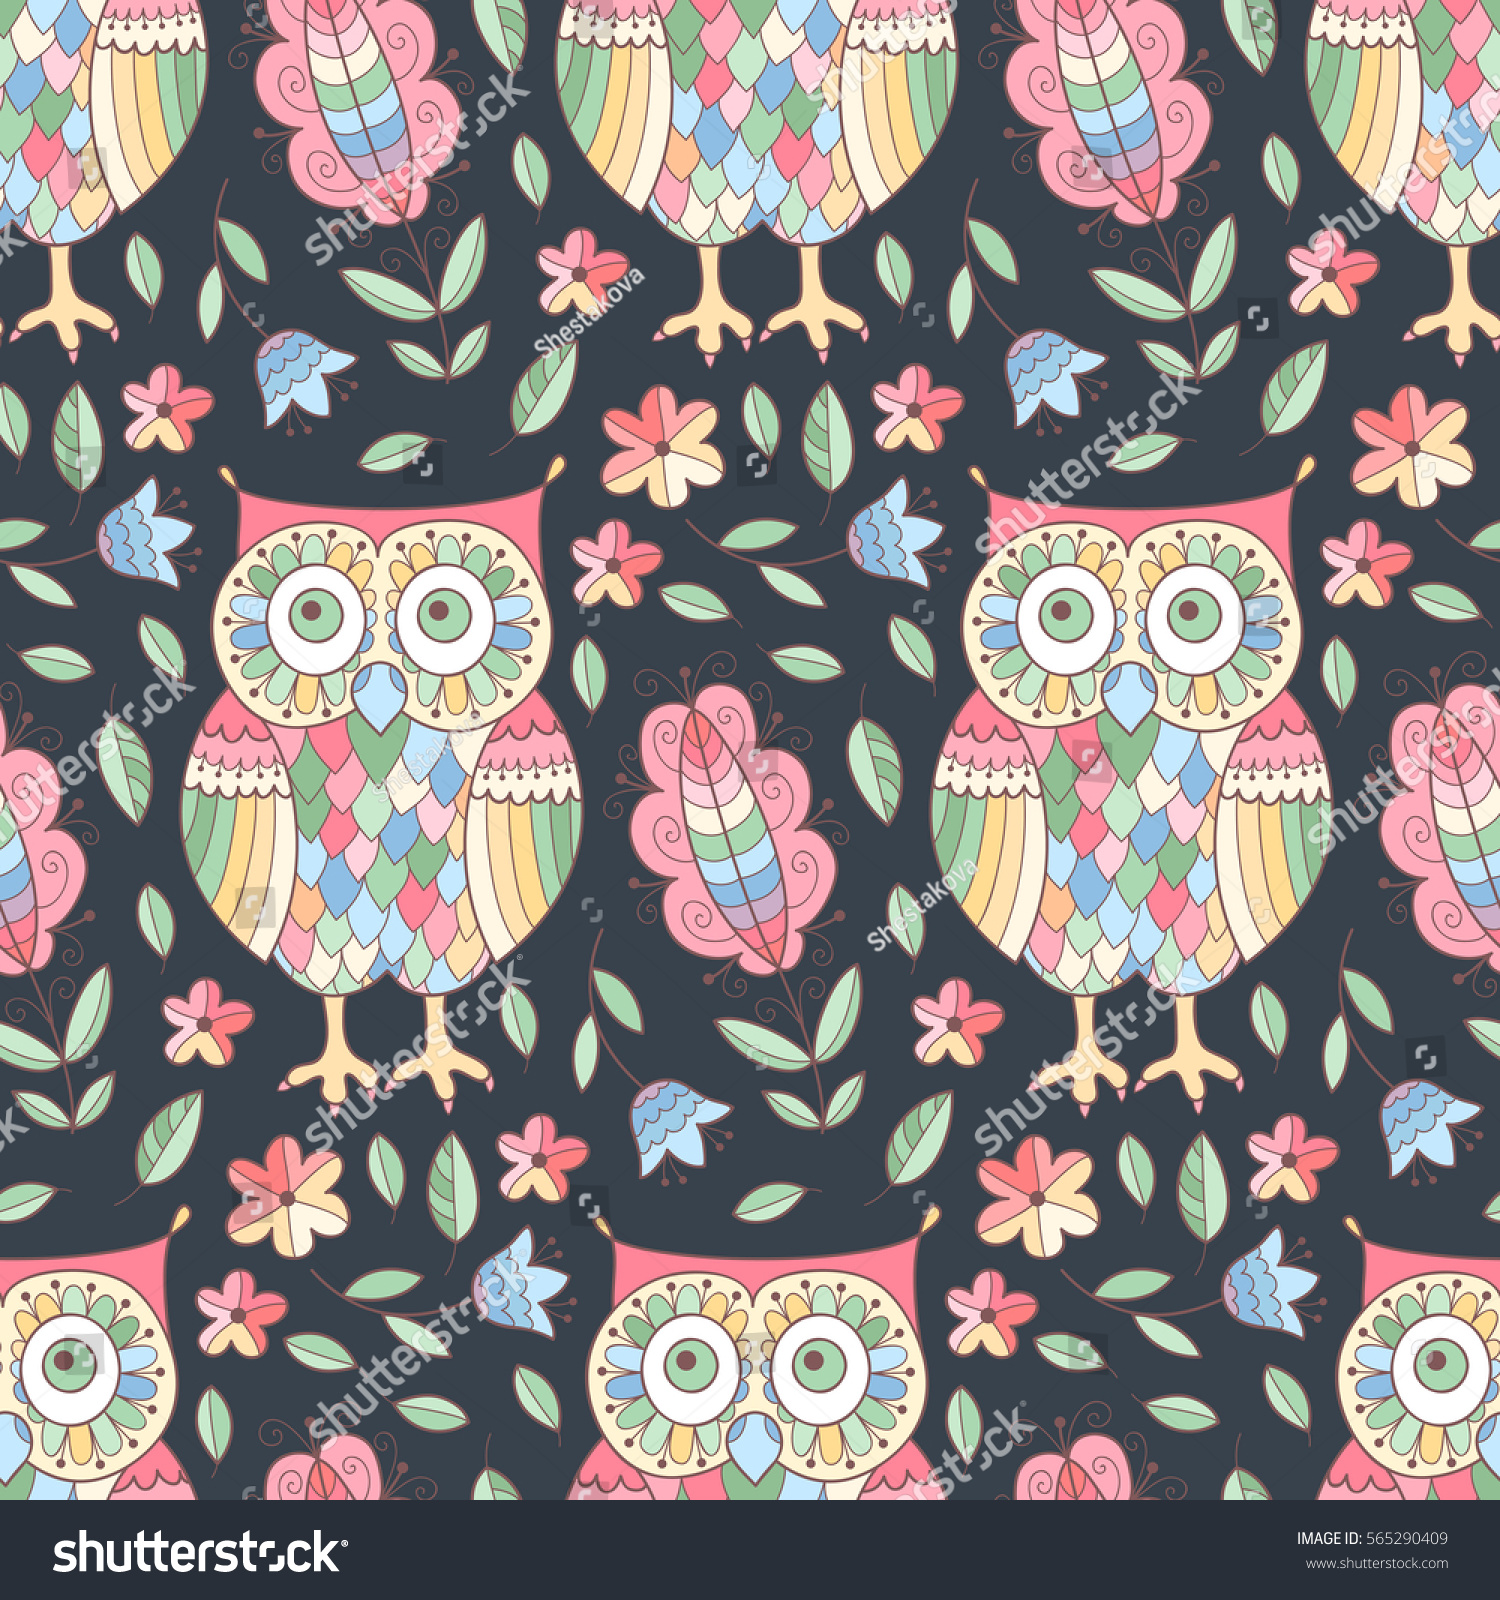 Floral Owl Vector Seamless Pattern Cute Stock Vector 565290409